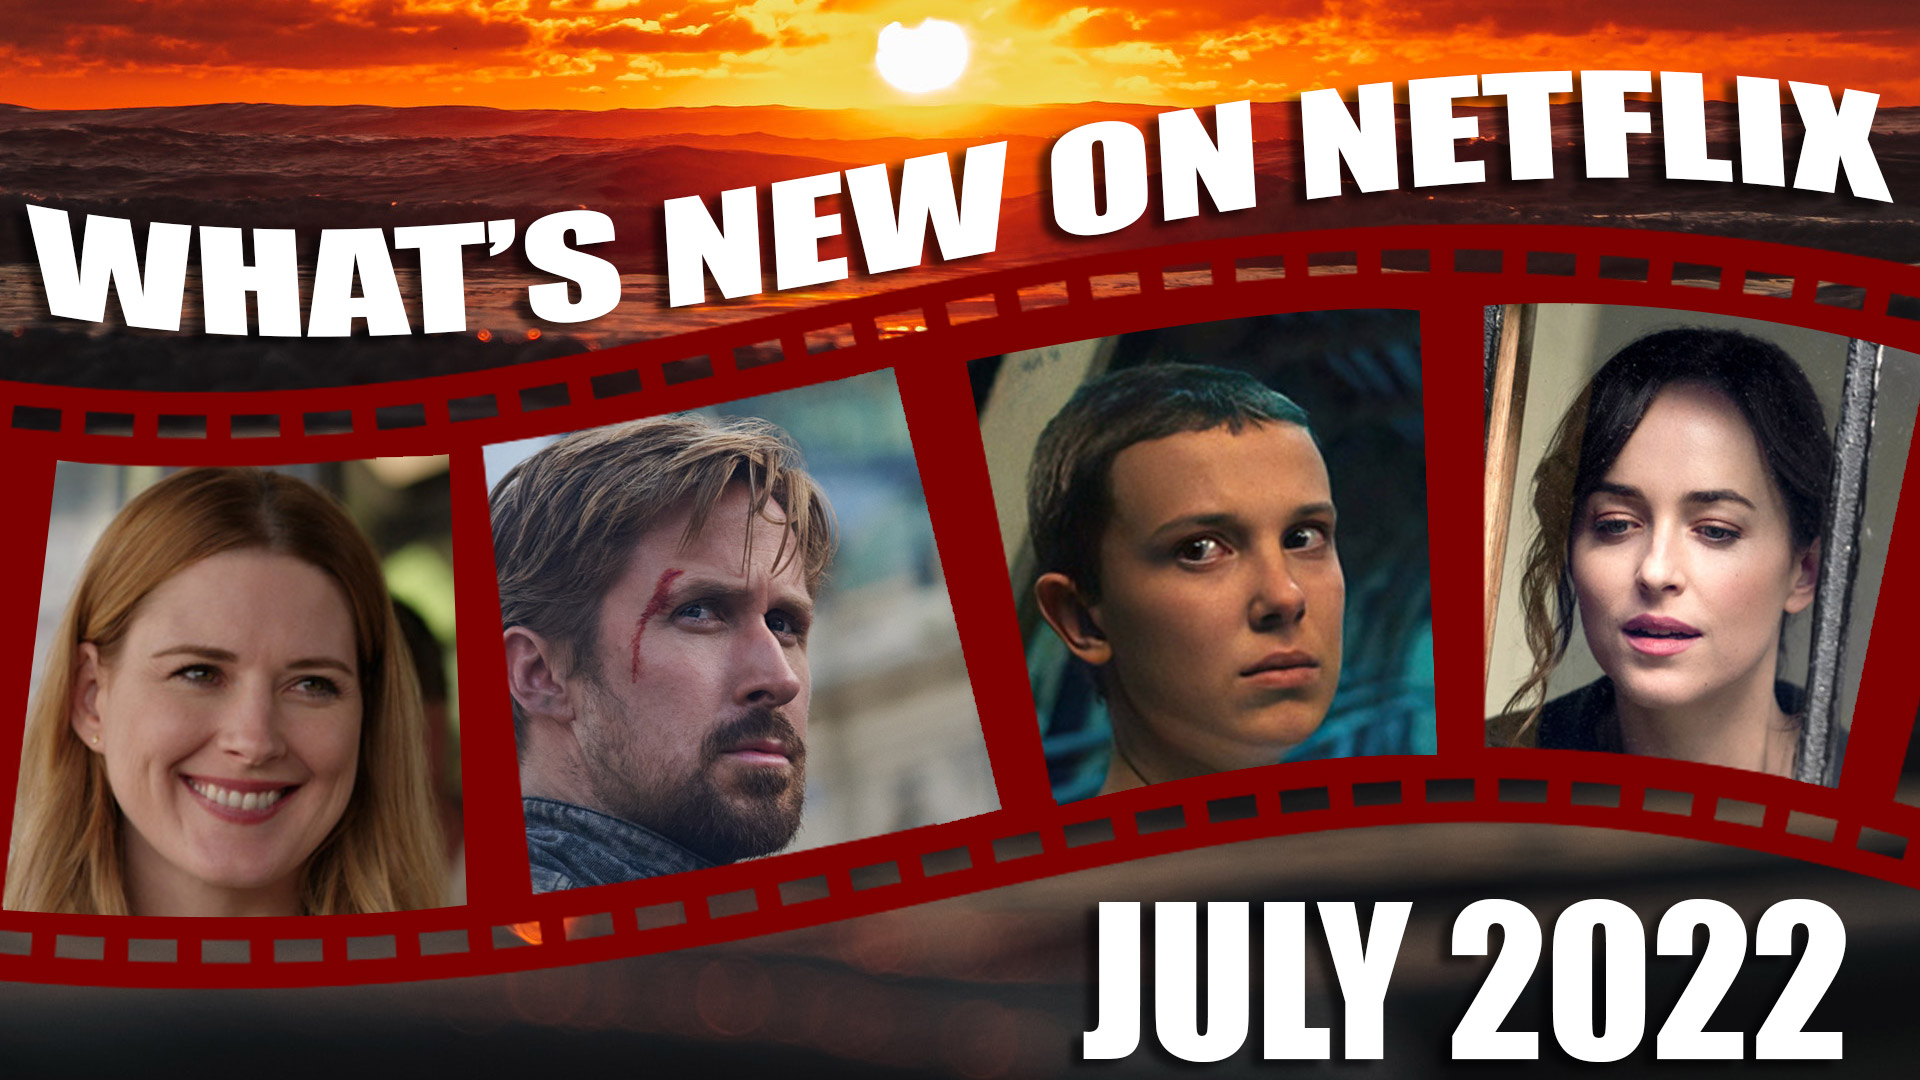 What's New on Netflix July 2022